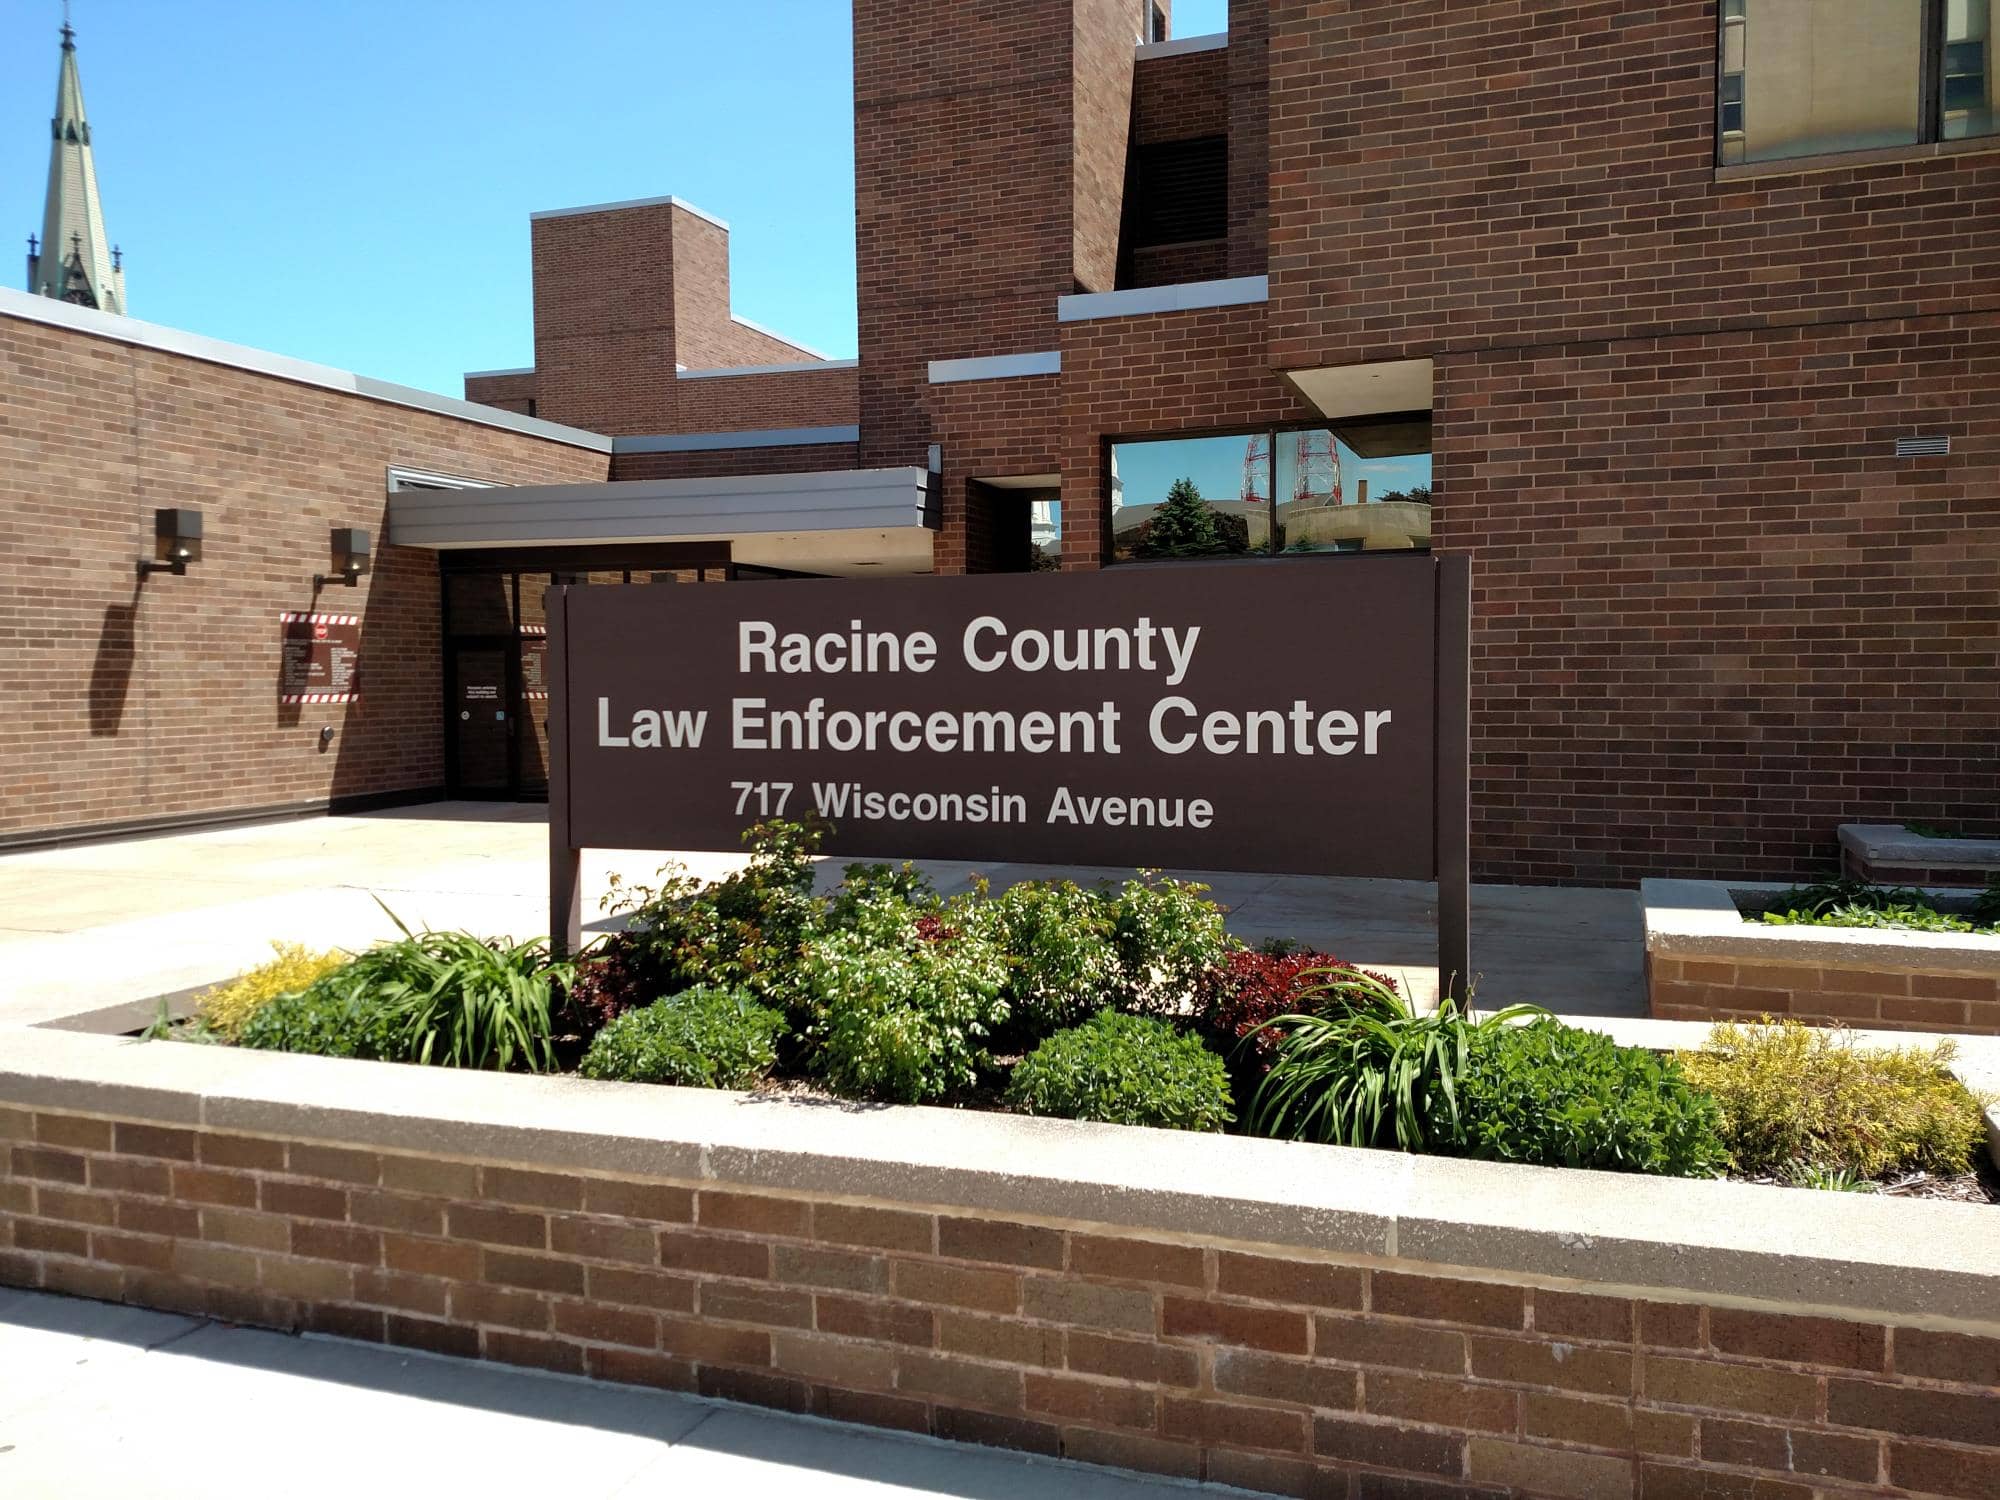 Image of Racine County Sheriff's Office and Jail Racine County Law Enforcement Center